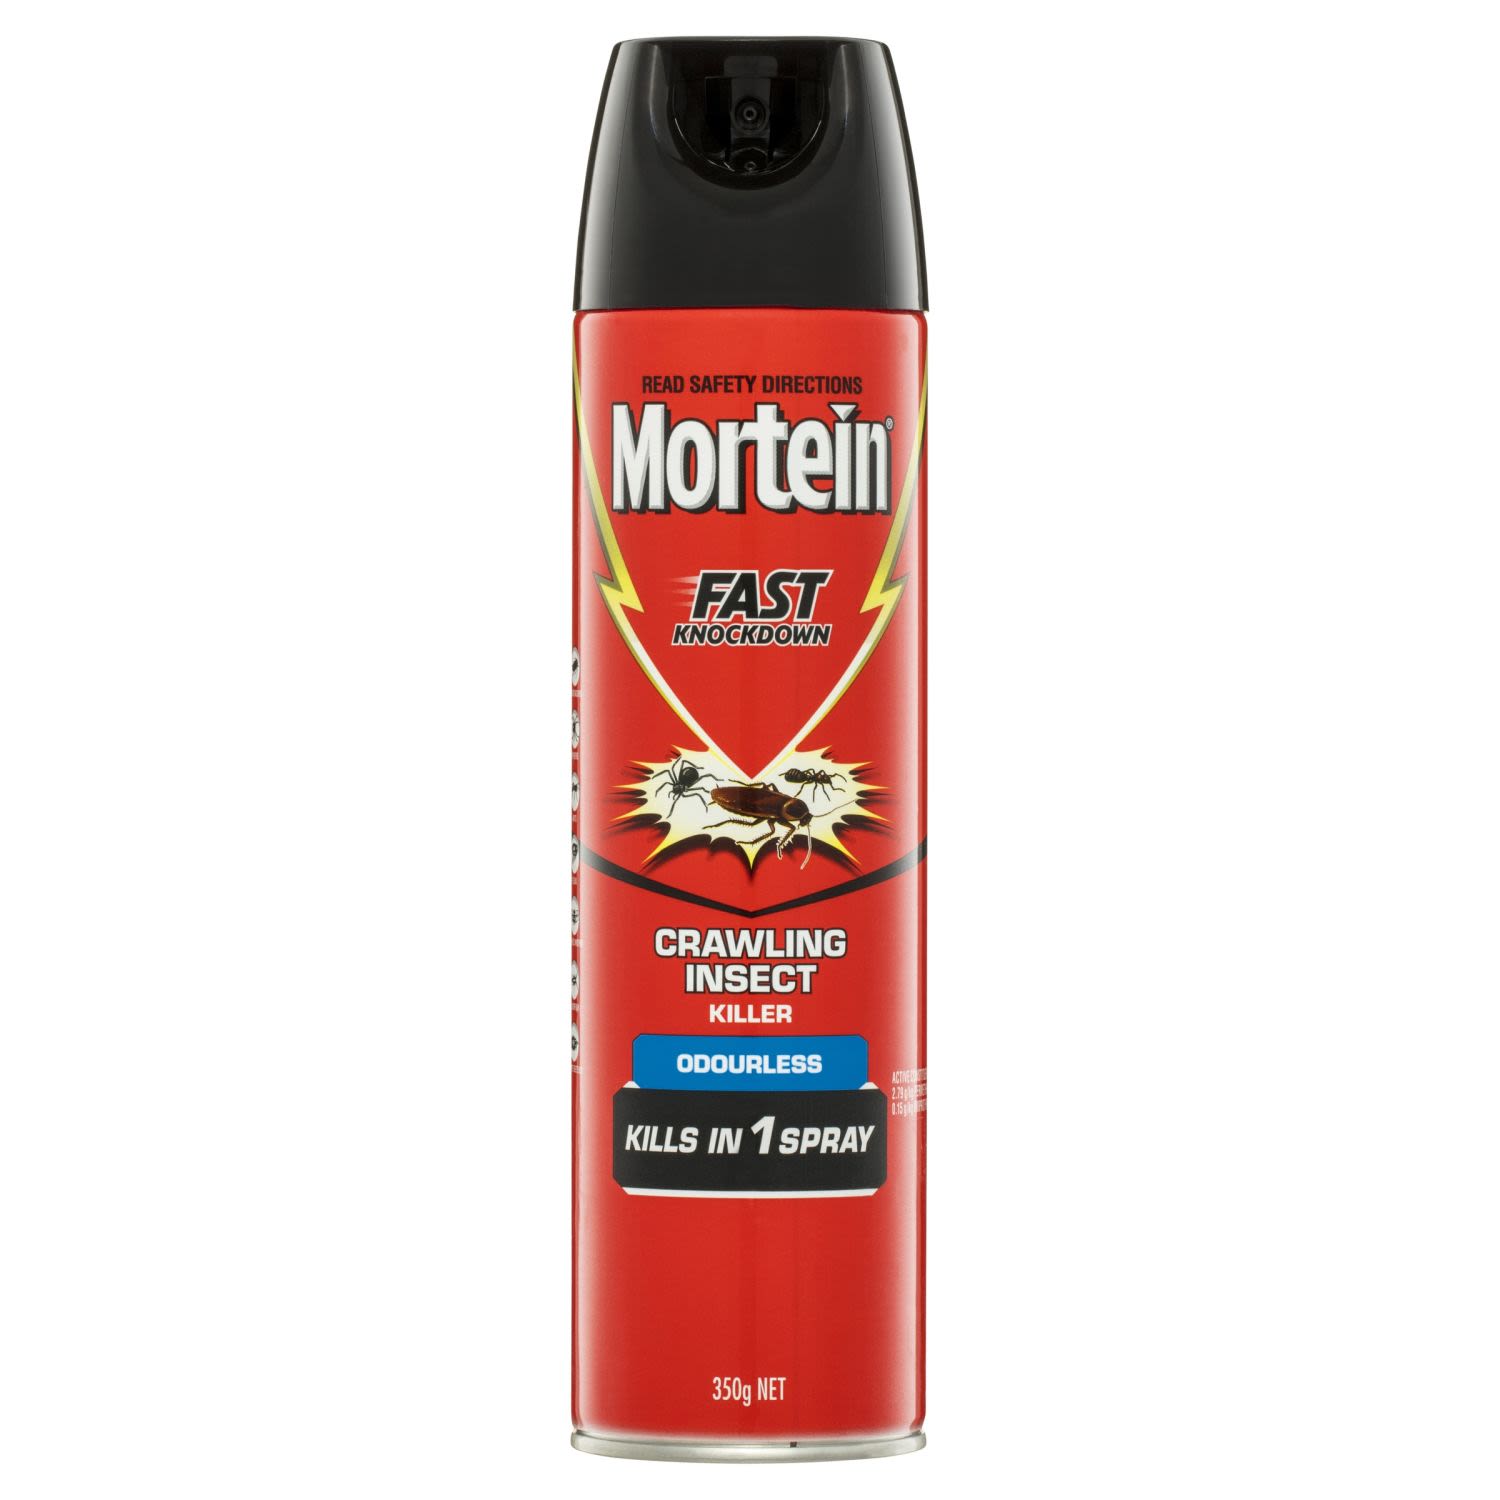 Mortein Odourless Surface Spray Crawling Insect Killer, 350 Gram